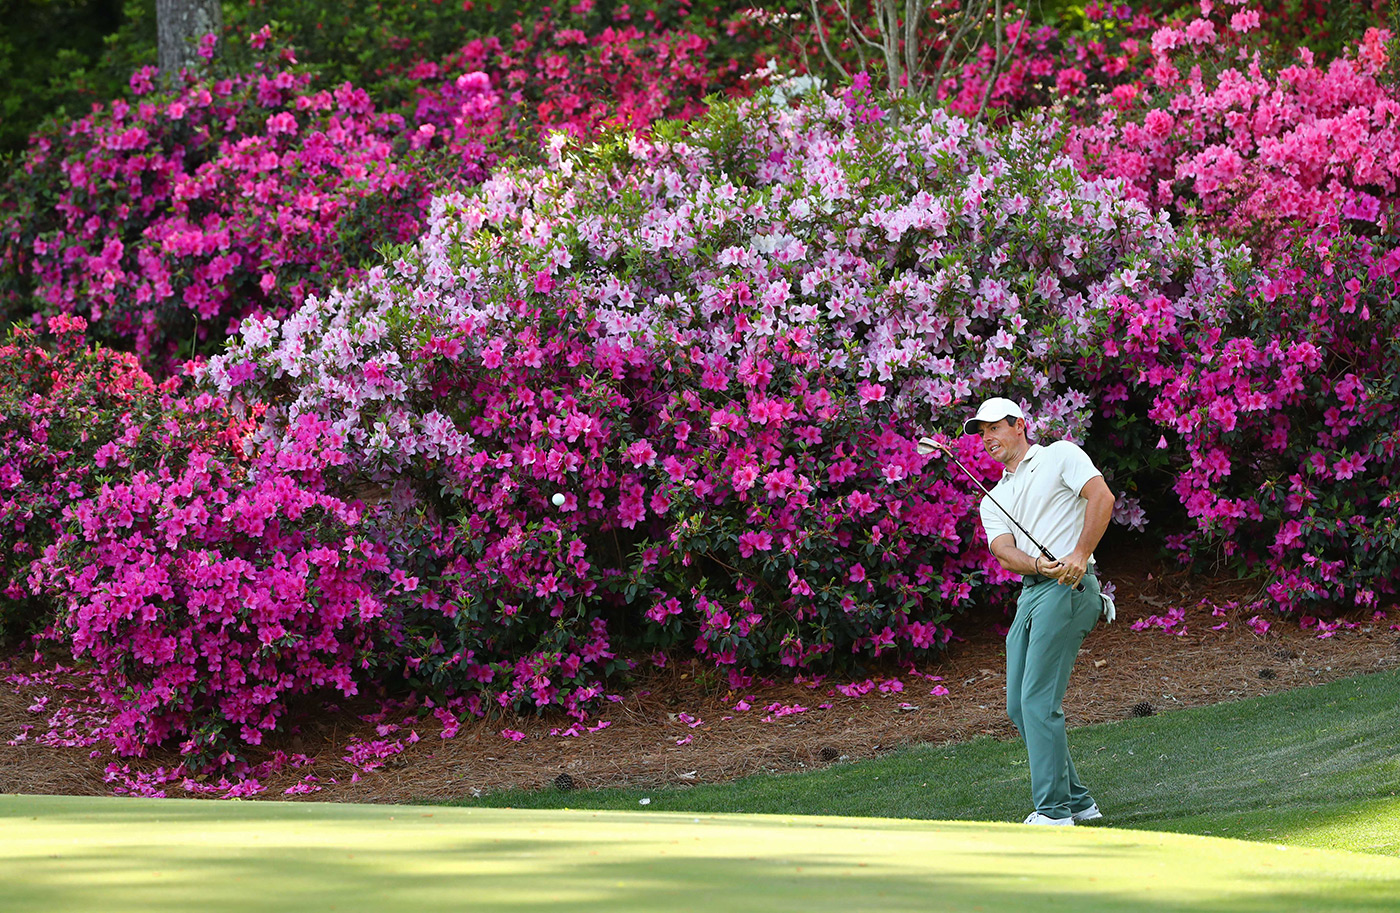 Rory McIlroy plays a shot from off the green during a practice round at the 2018 Masters.